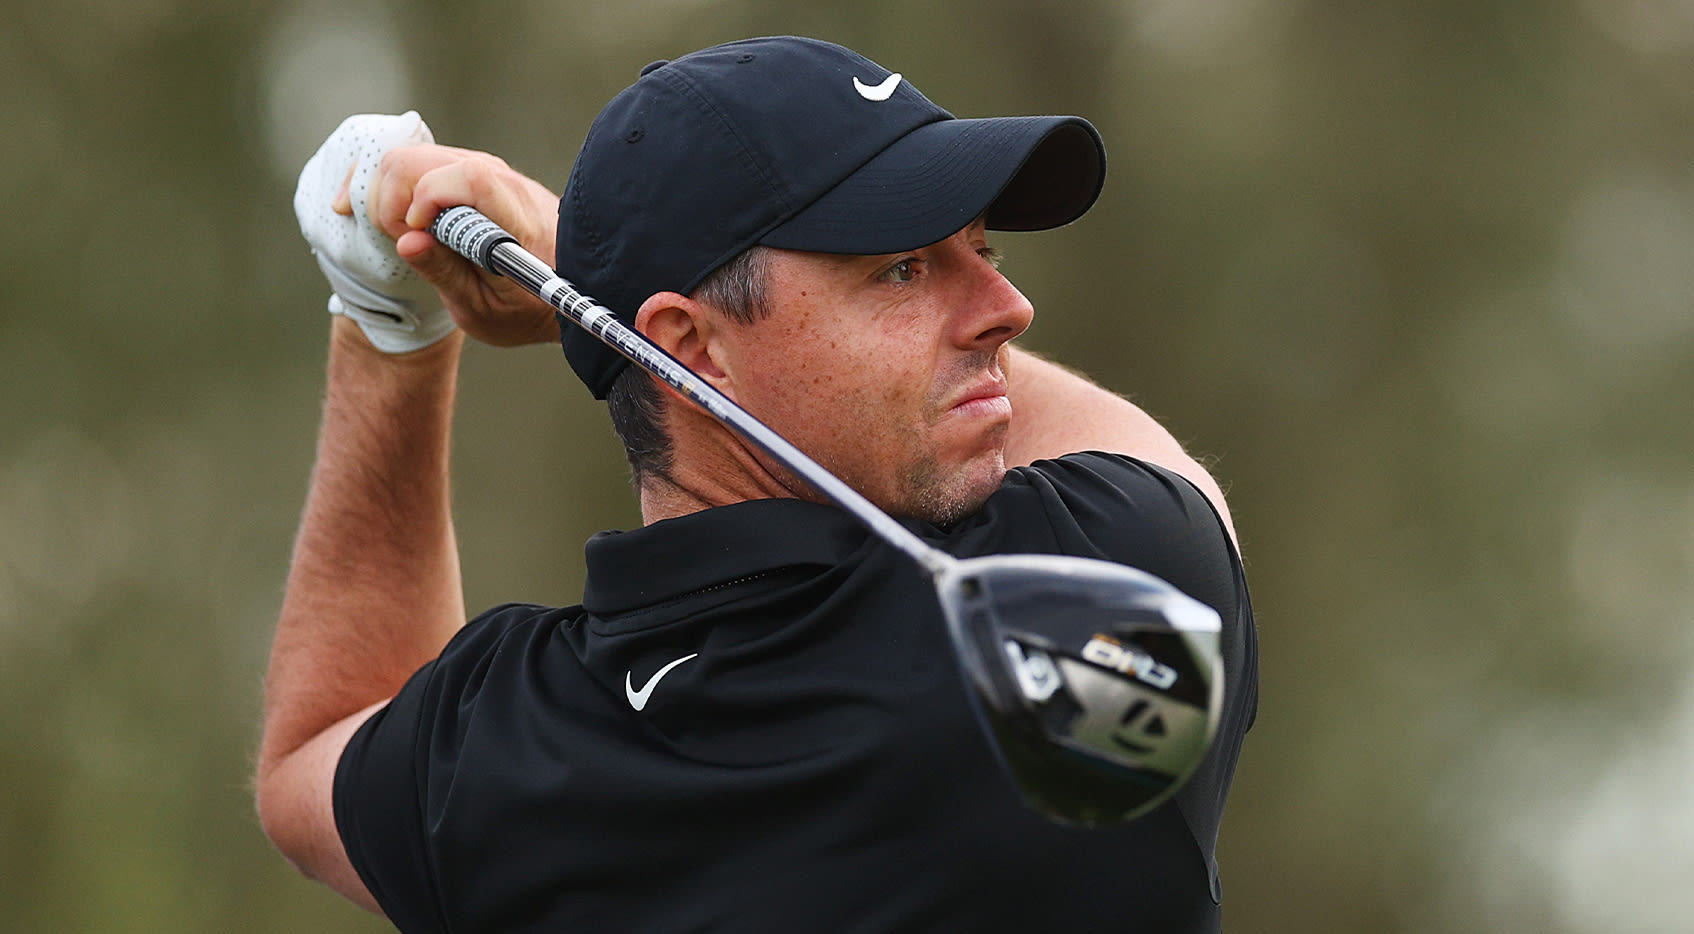 Rory McIlroy testing new TaylorMade 'Qi10 LS' driver PGA TOUR